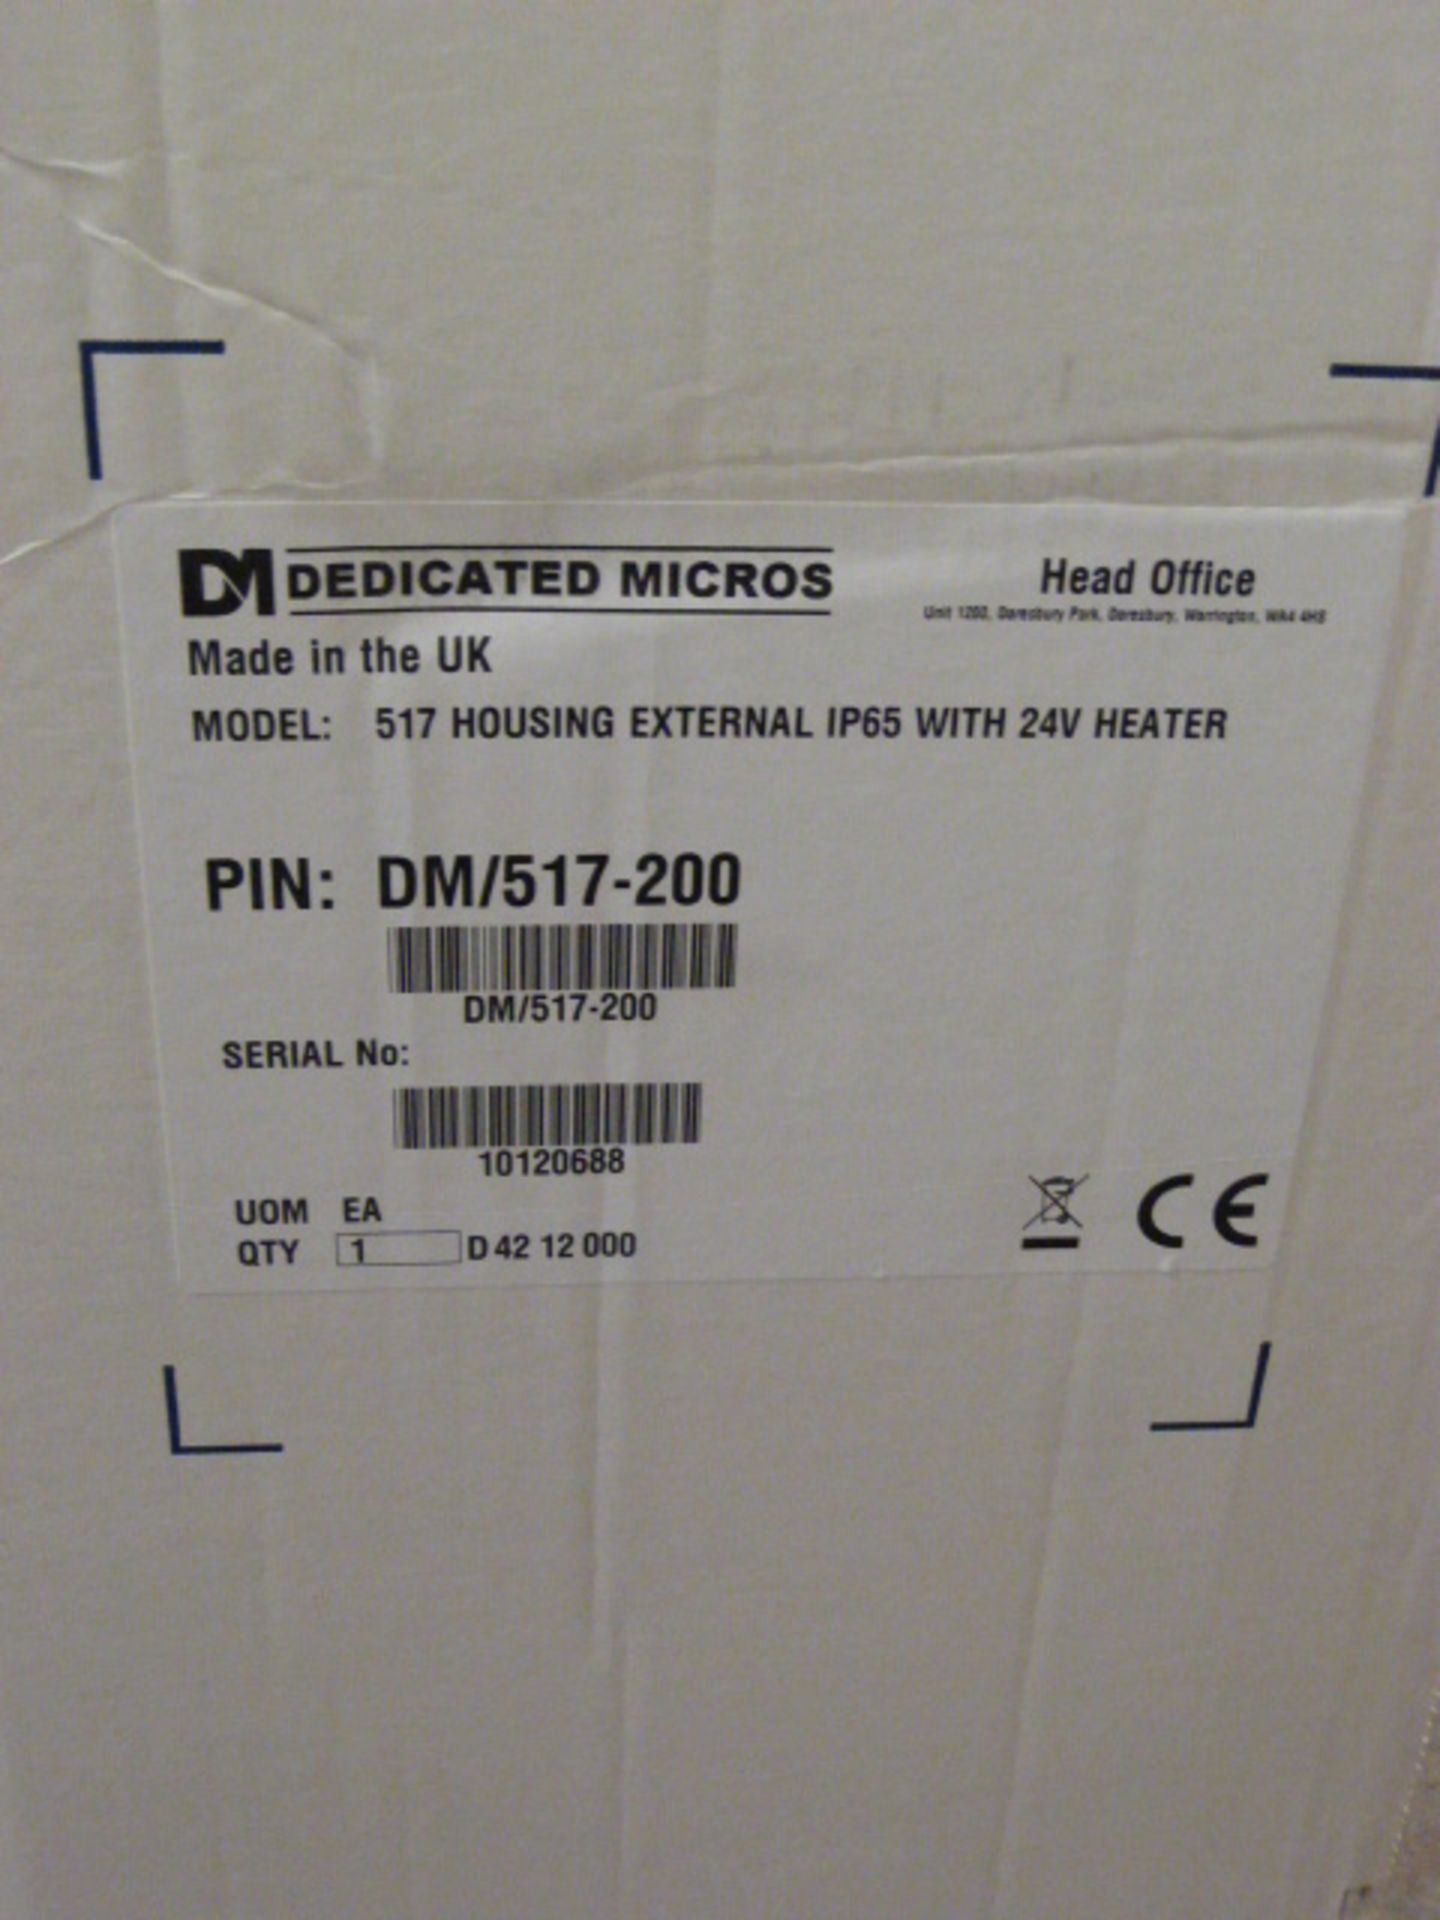 *Dedicated Micros IP65 External Housing with 24V H